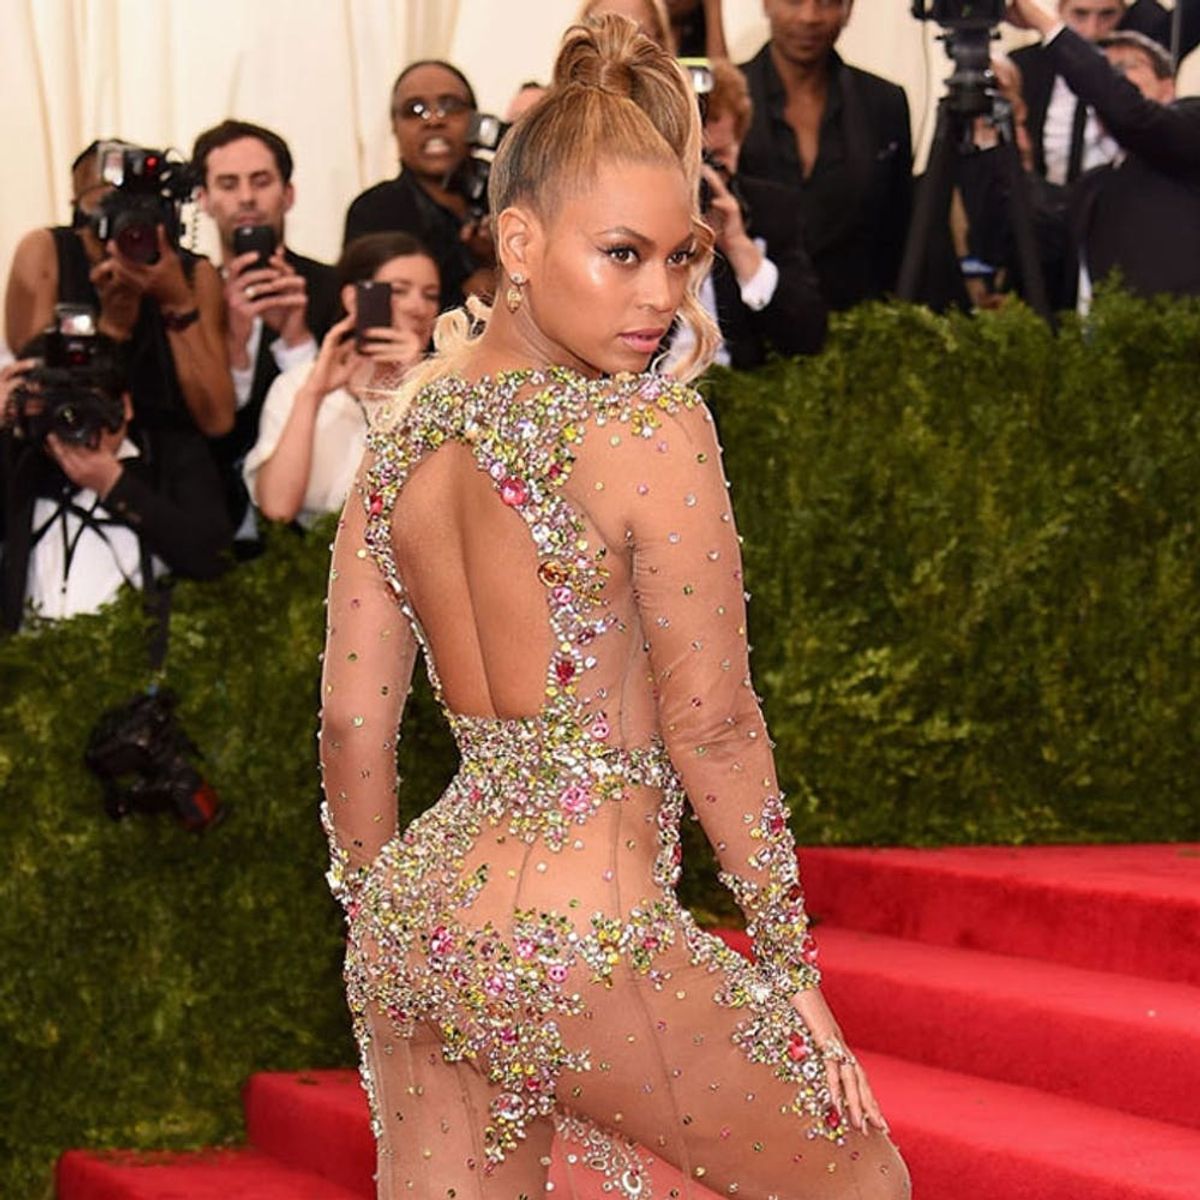 The Most Jaw-Dropping Looks from the 2015 Met Gala Red Carpet